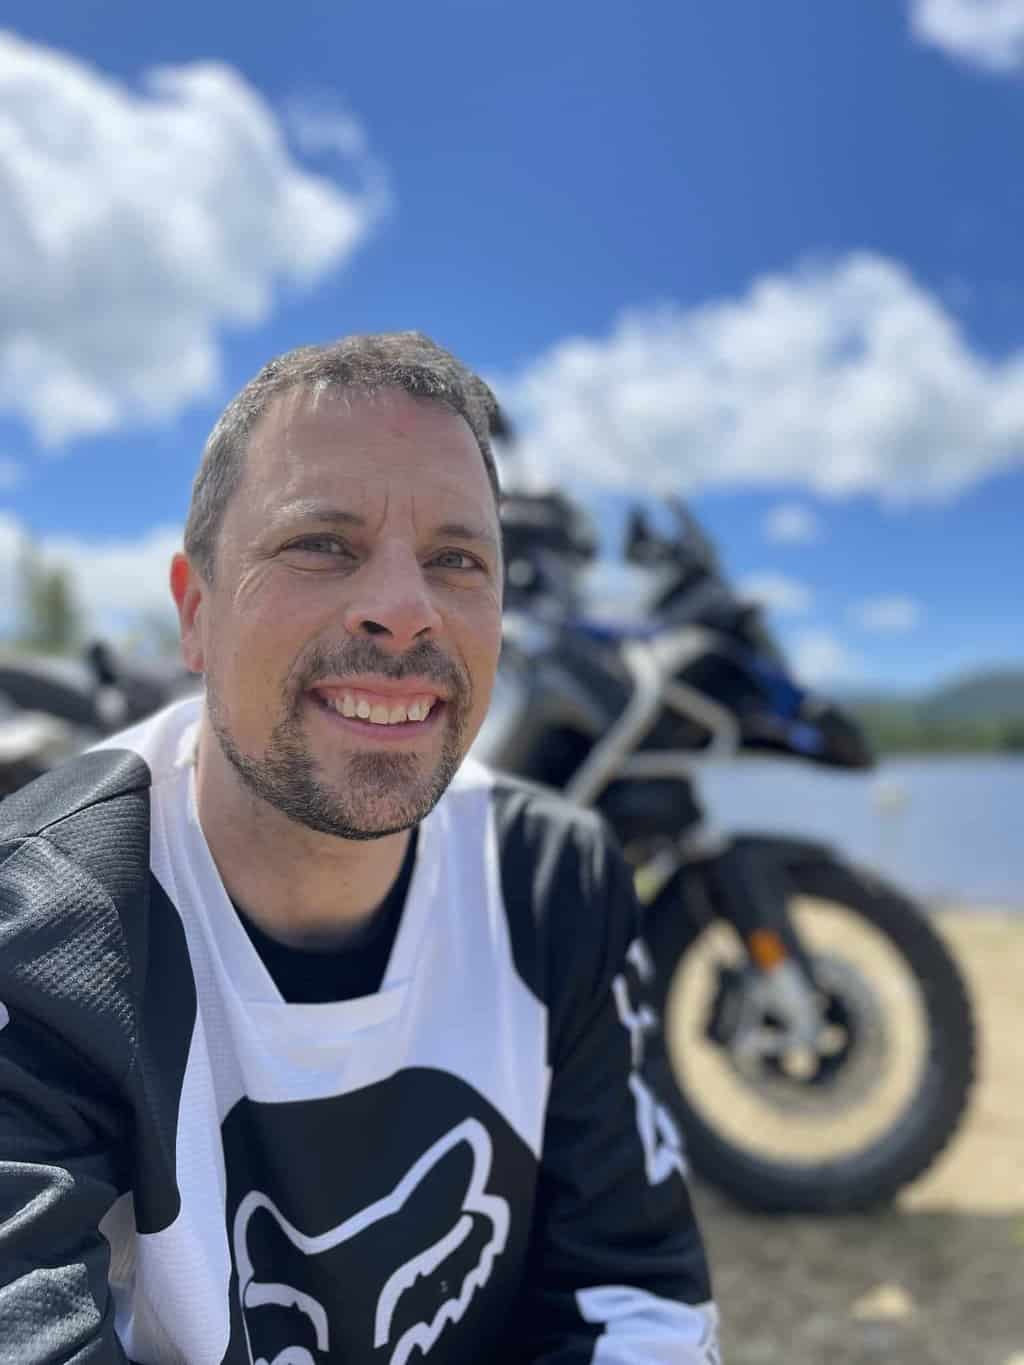 Is it safe to ride a motorcycle when you have ADHD?